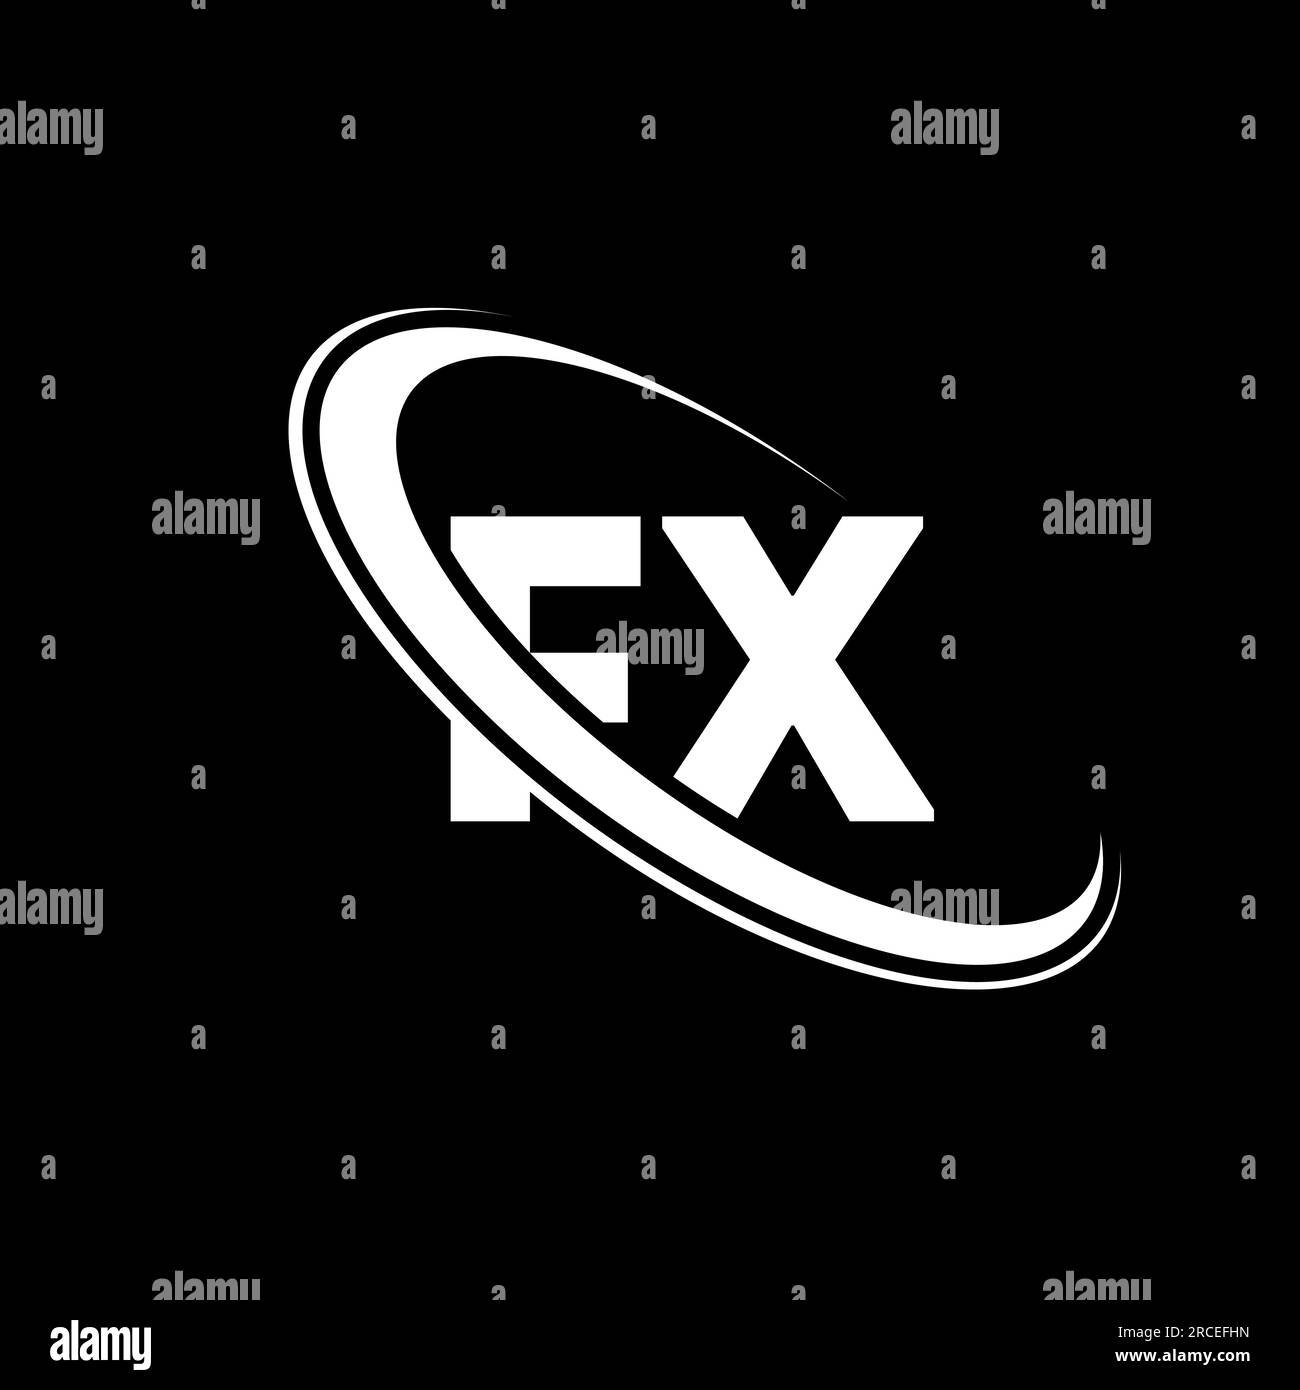 Initial Letter Fx Vector & Photo (Free Trial)